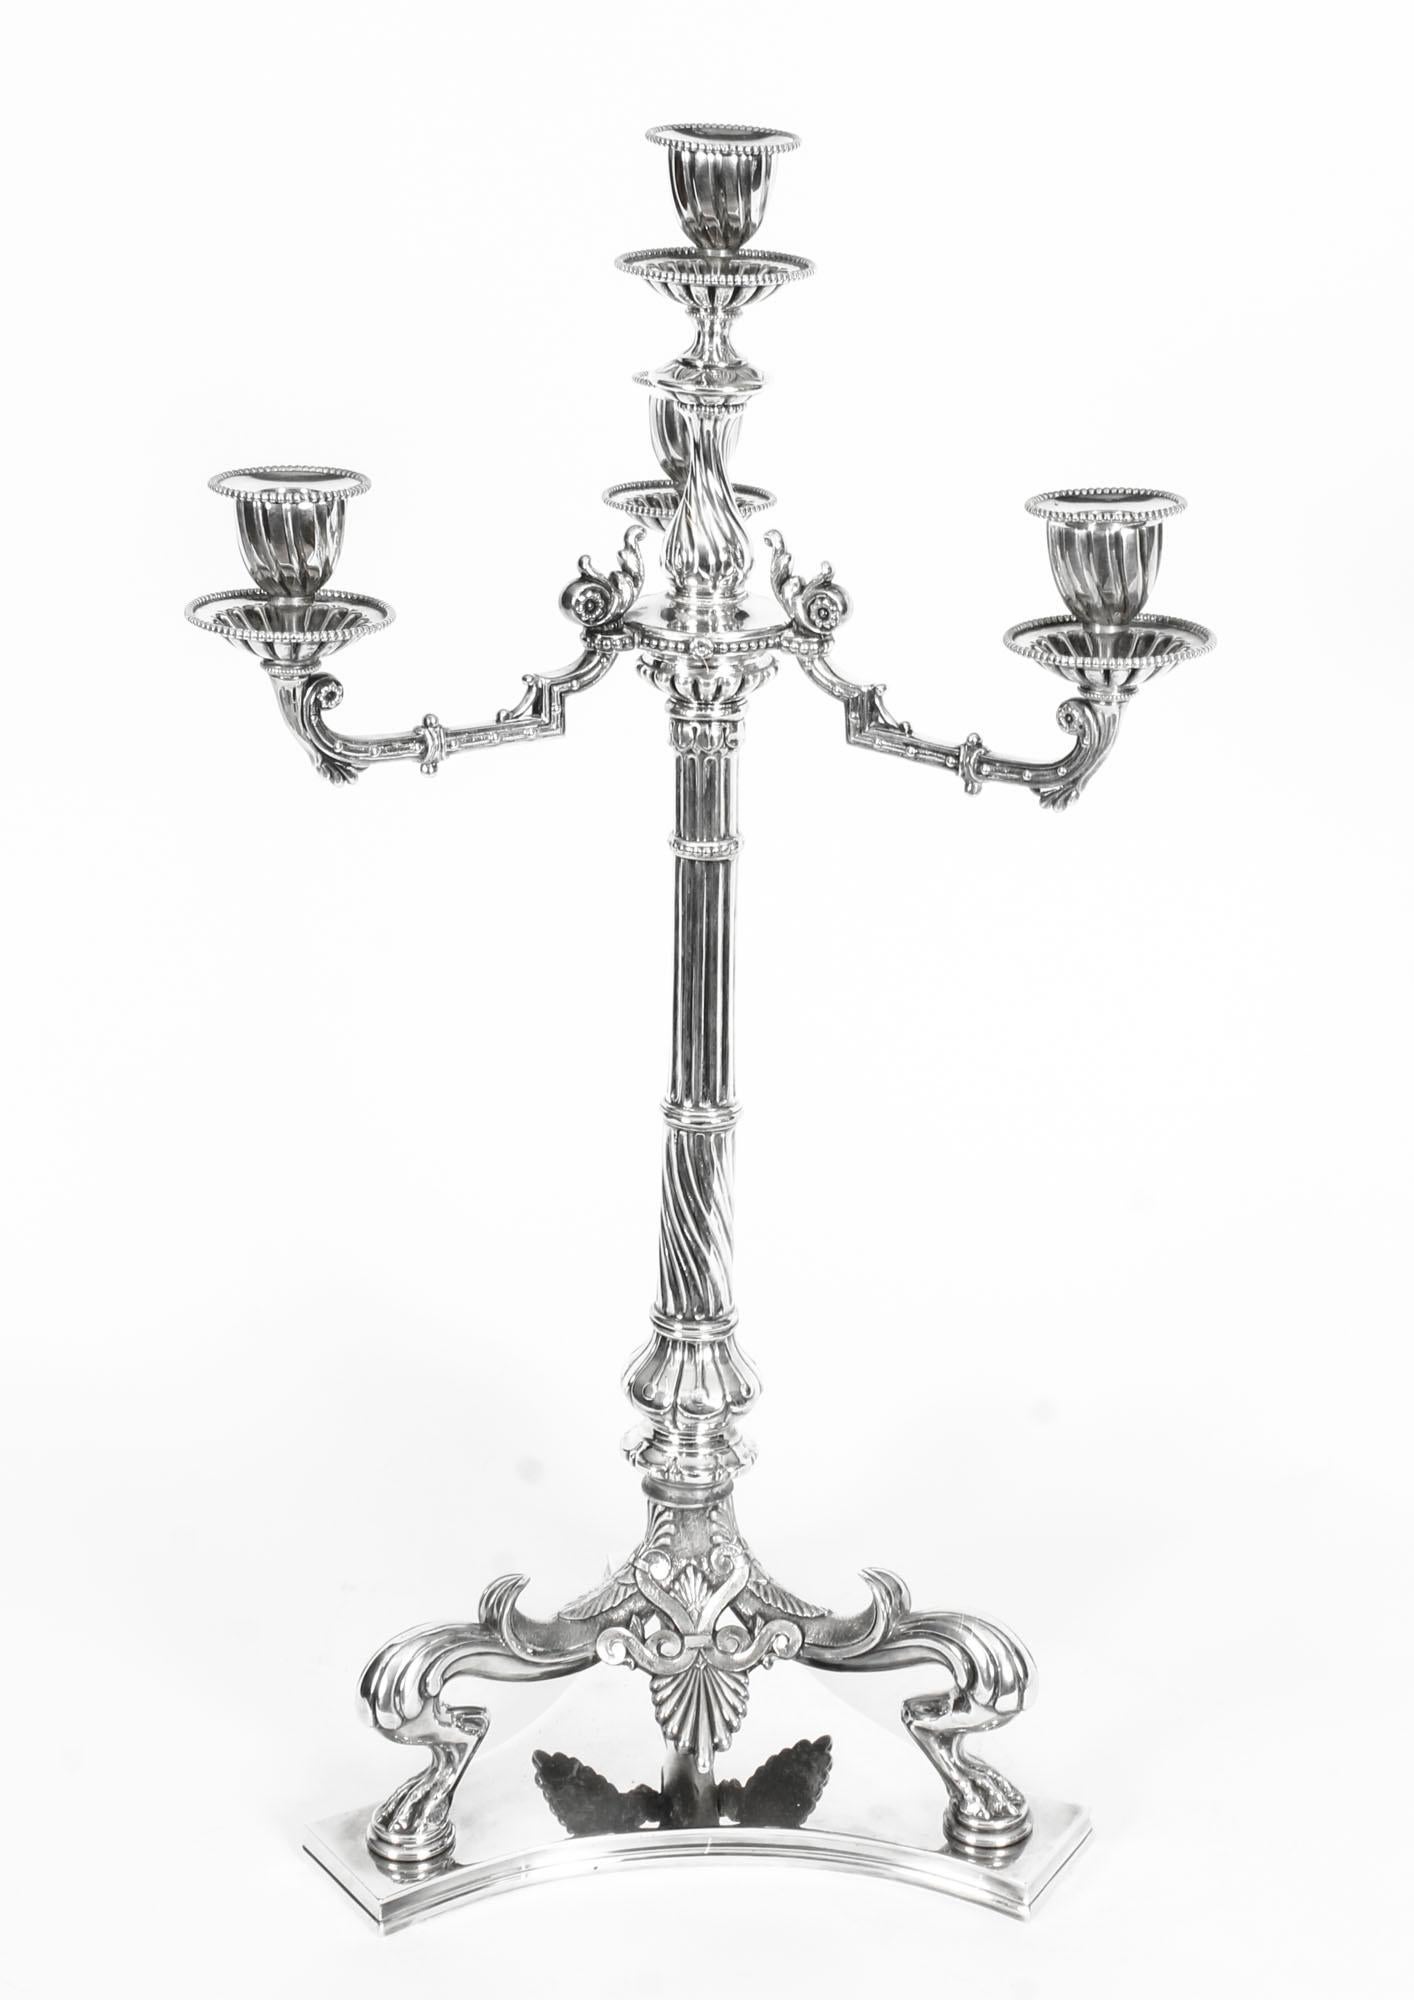 Neoclassical 19th Century Pair of Neoclasscal Silver Plated 4-Light Candelabra Hodd & Linley